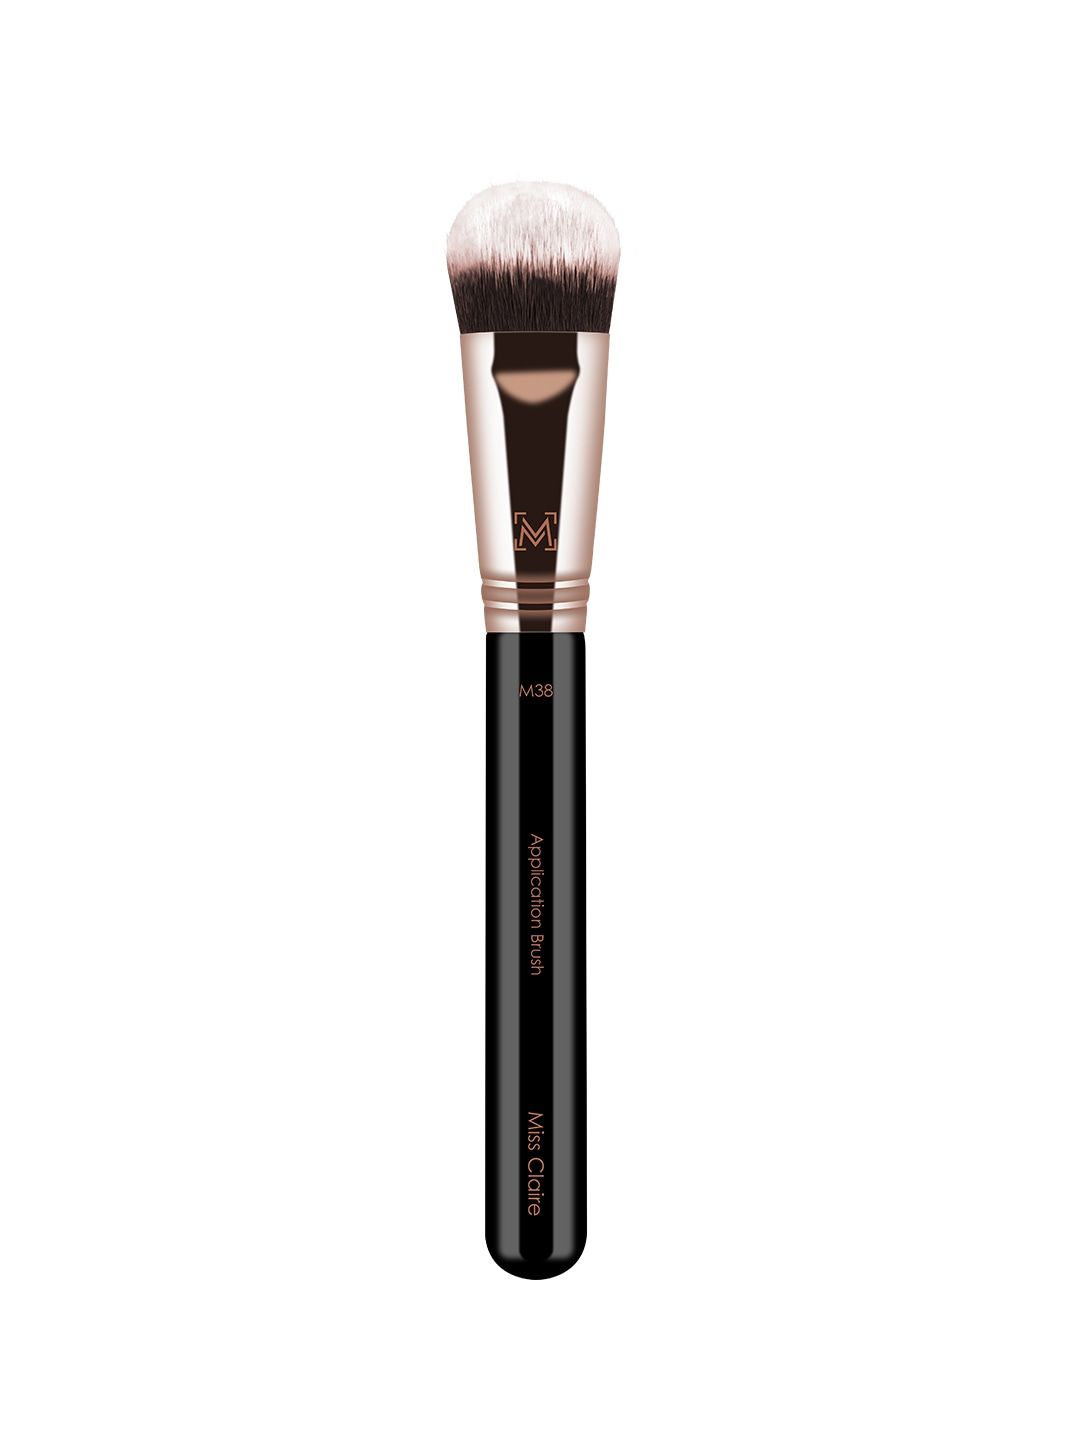 Miss Claire Application Brush - M38 Black & Rose Gold-Toned Price in India